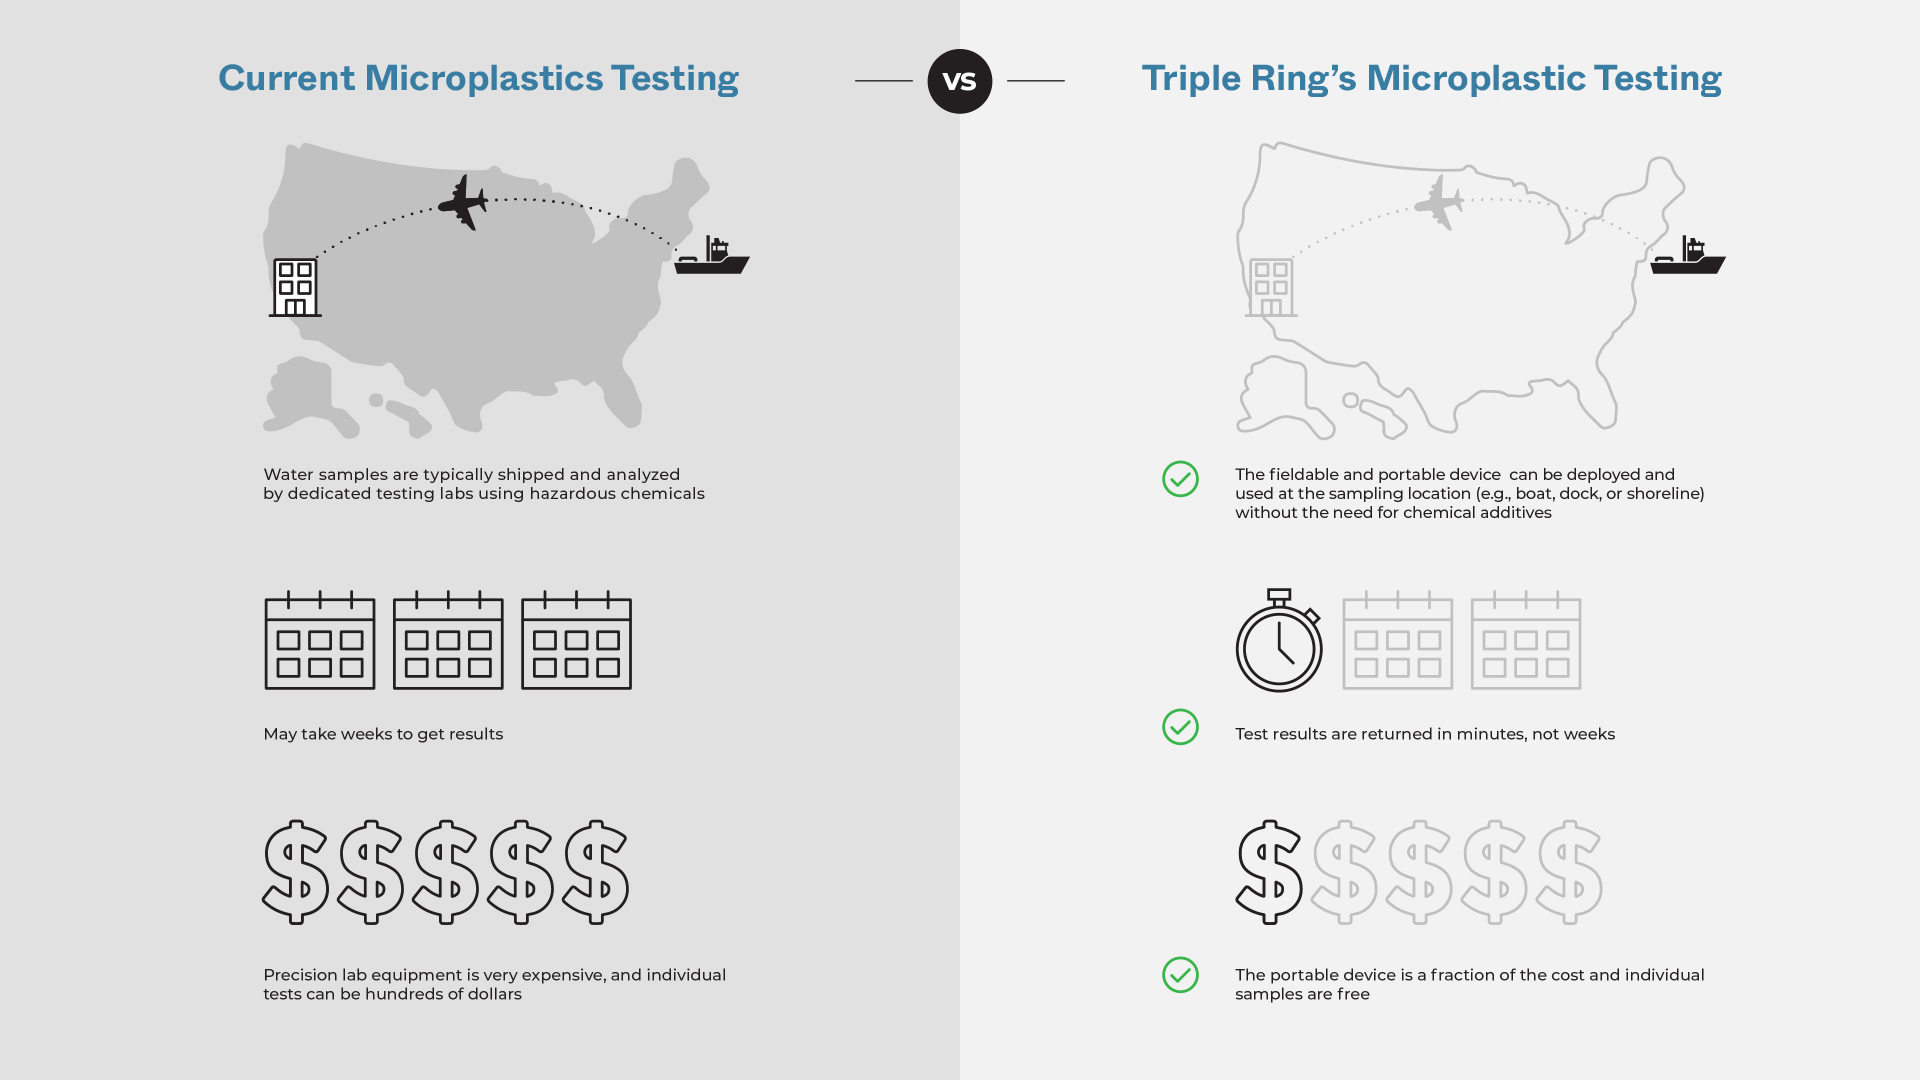 Comparison of current vs triple ring's microplastic testing methods, highlighting efficiency, cost, and portability differences.